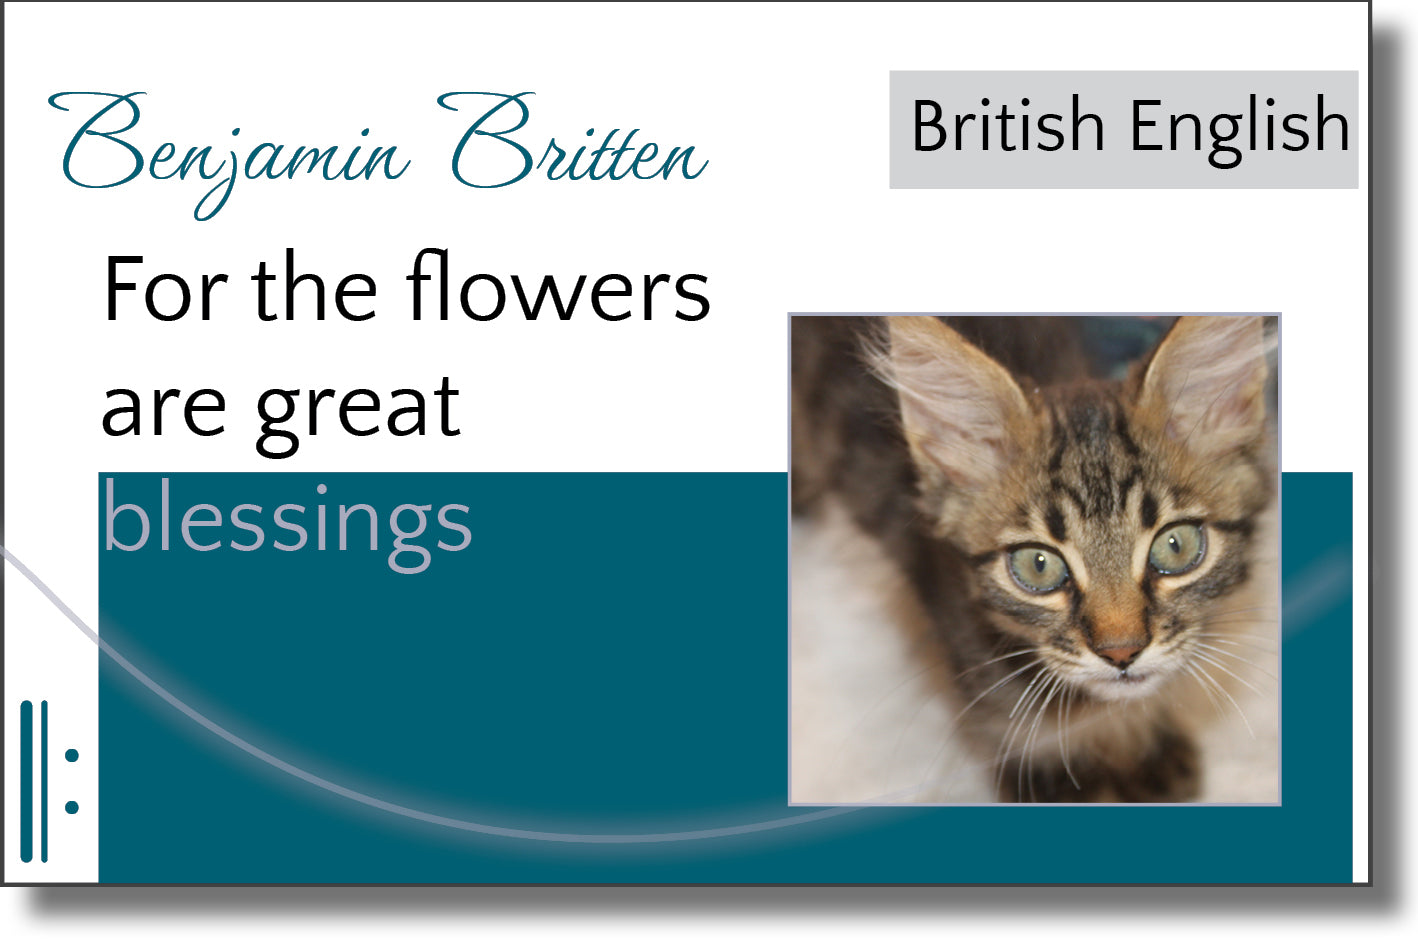 Britten - For the flowers are great blessings